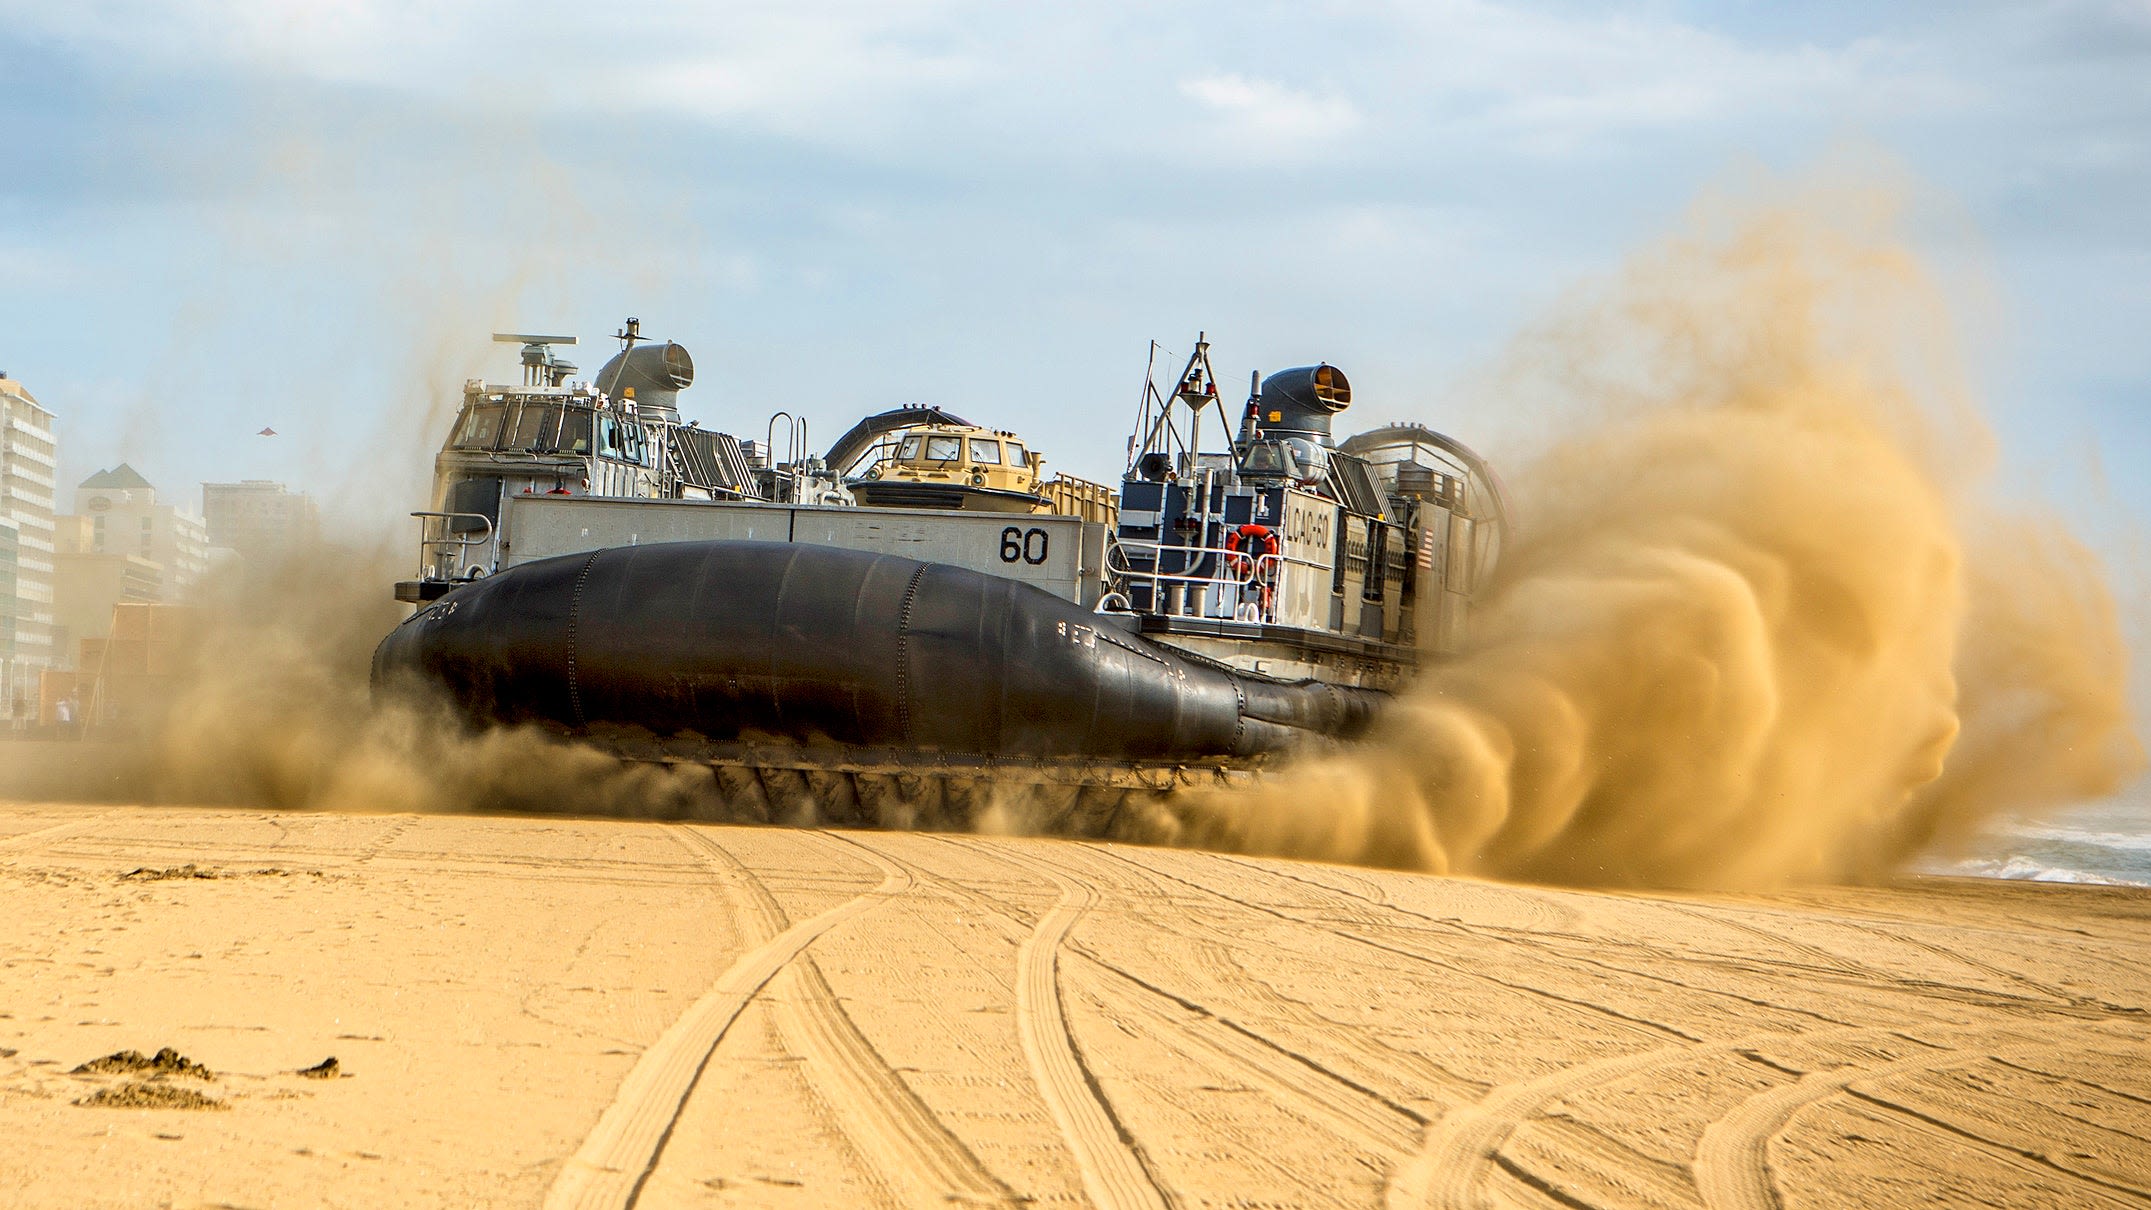 Why Aren't U.S. Navy LCAC Hovercraft Being Used To Deliver Aid To Gaza?